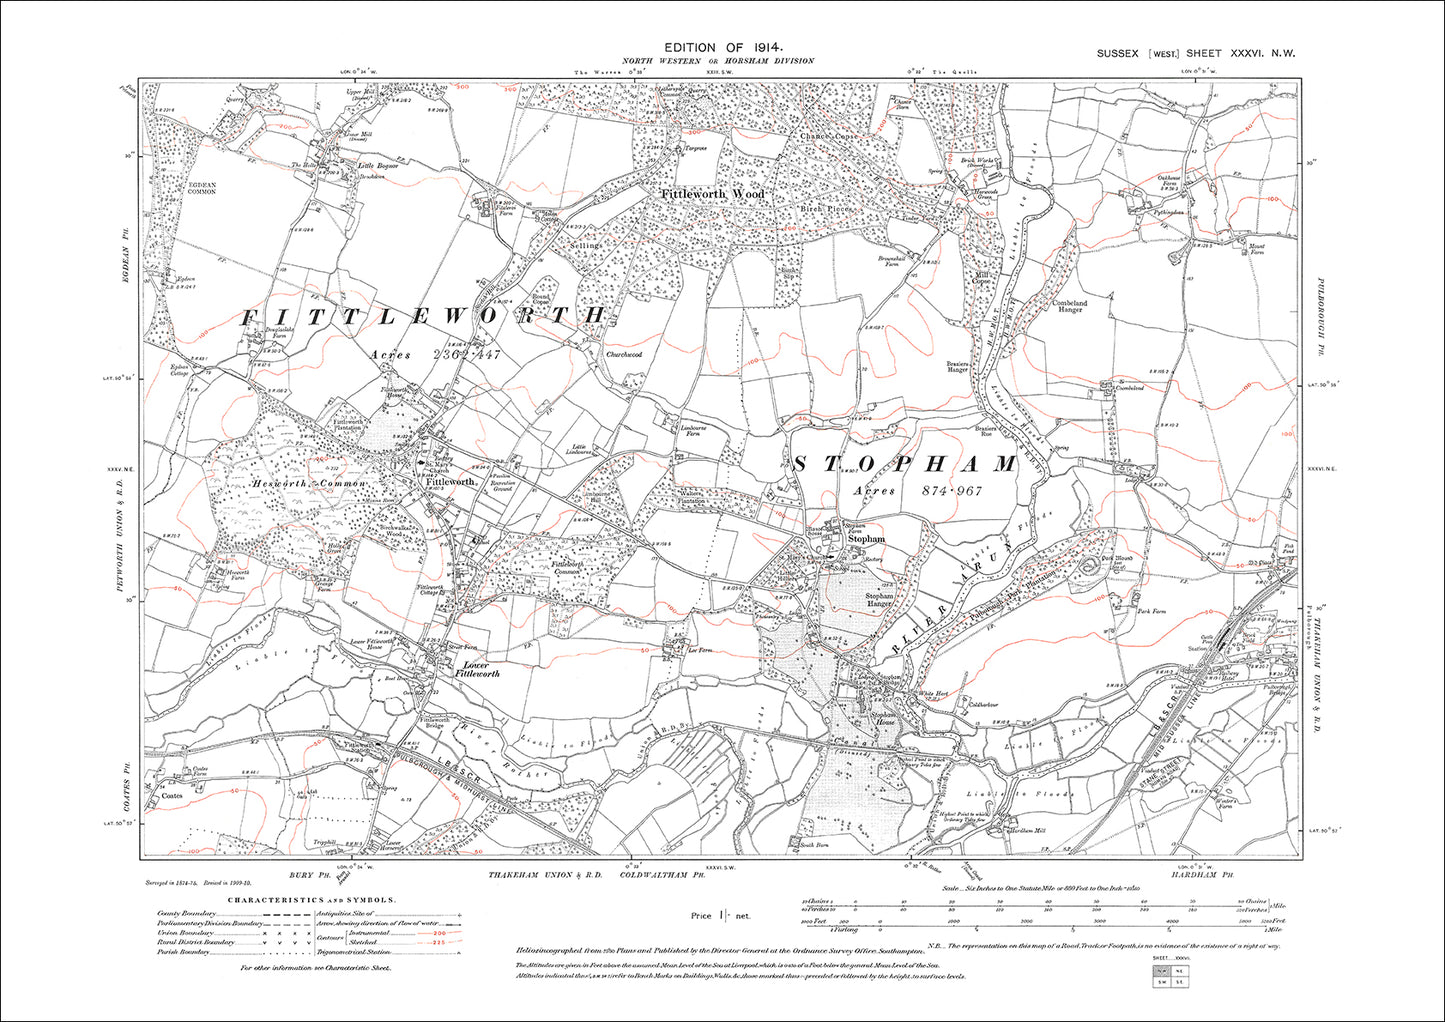 Pulborough (west), Stopham, Fittleworth, Little Bognor, old map Sussex 1914: 36NW